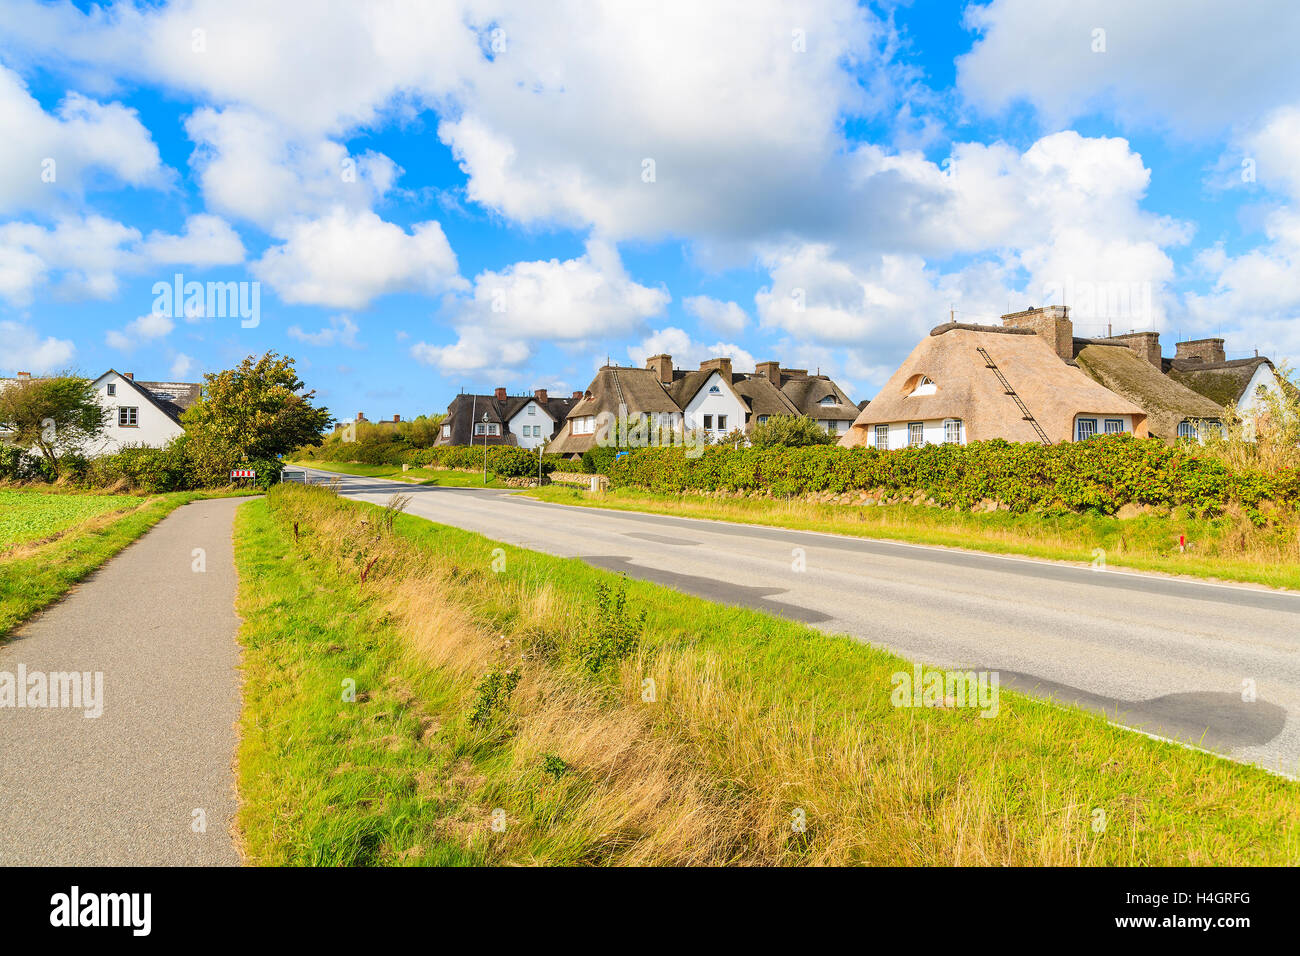 Road in Keitum village with typical straw roof houses on Sylt island, Germany Stock Photo